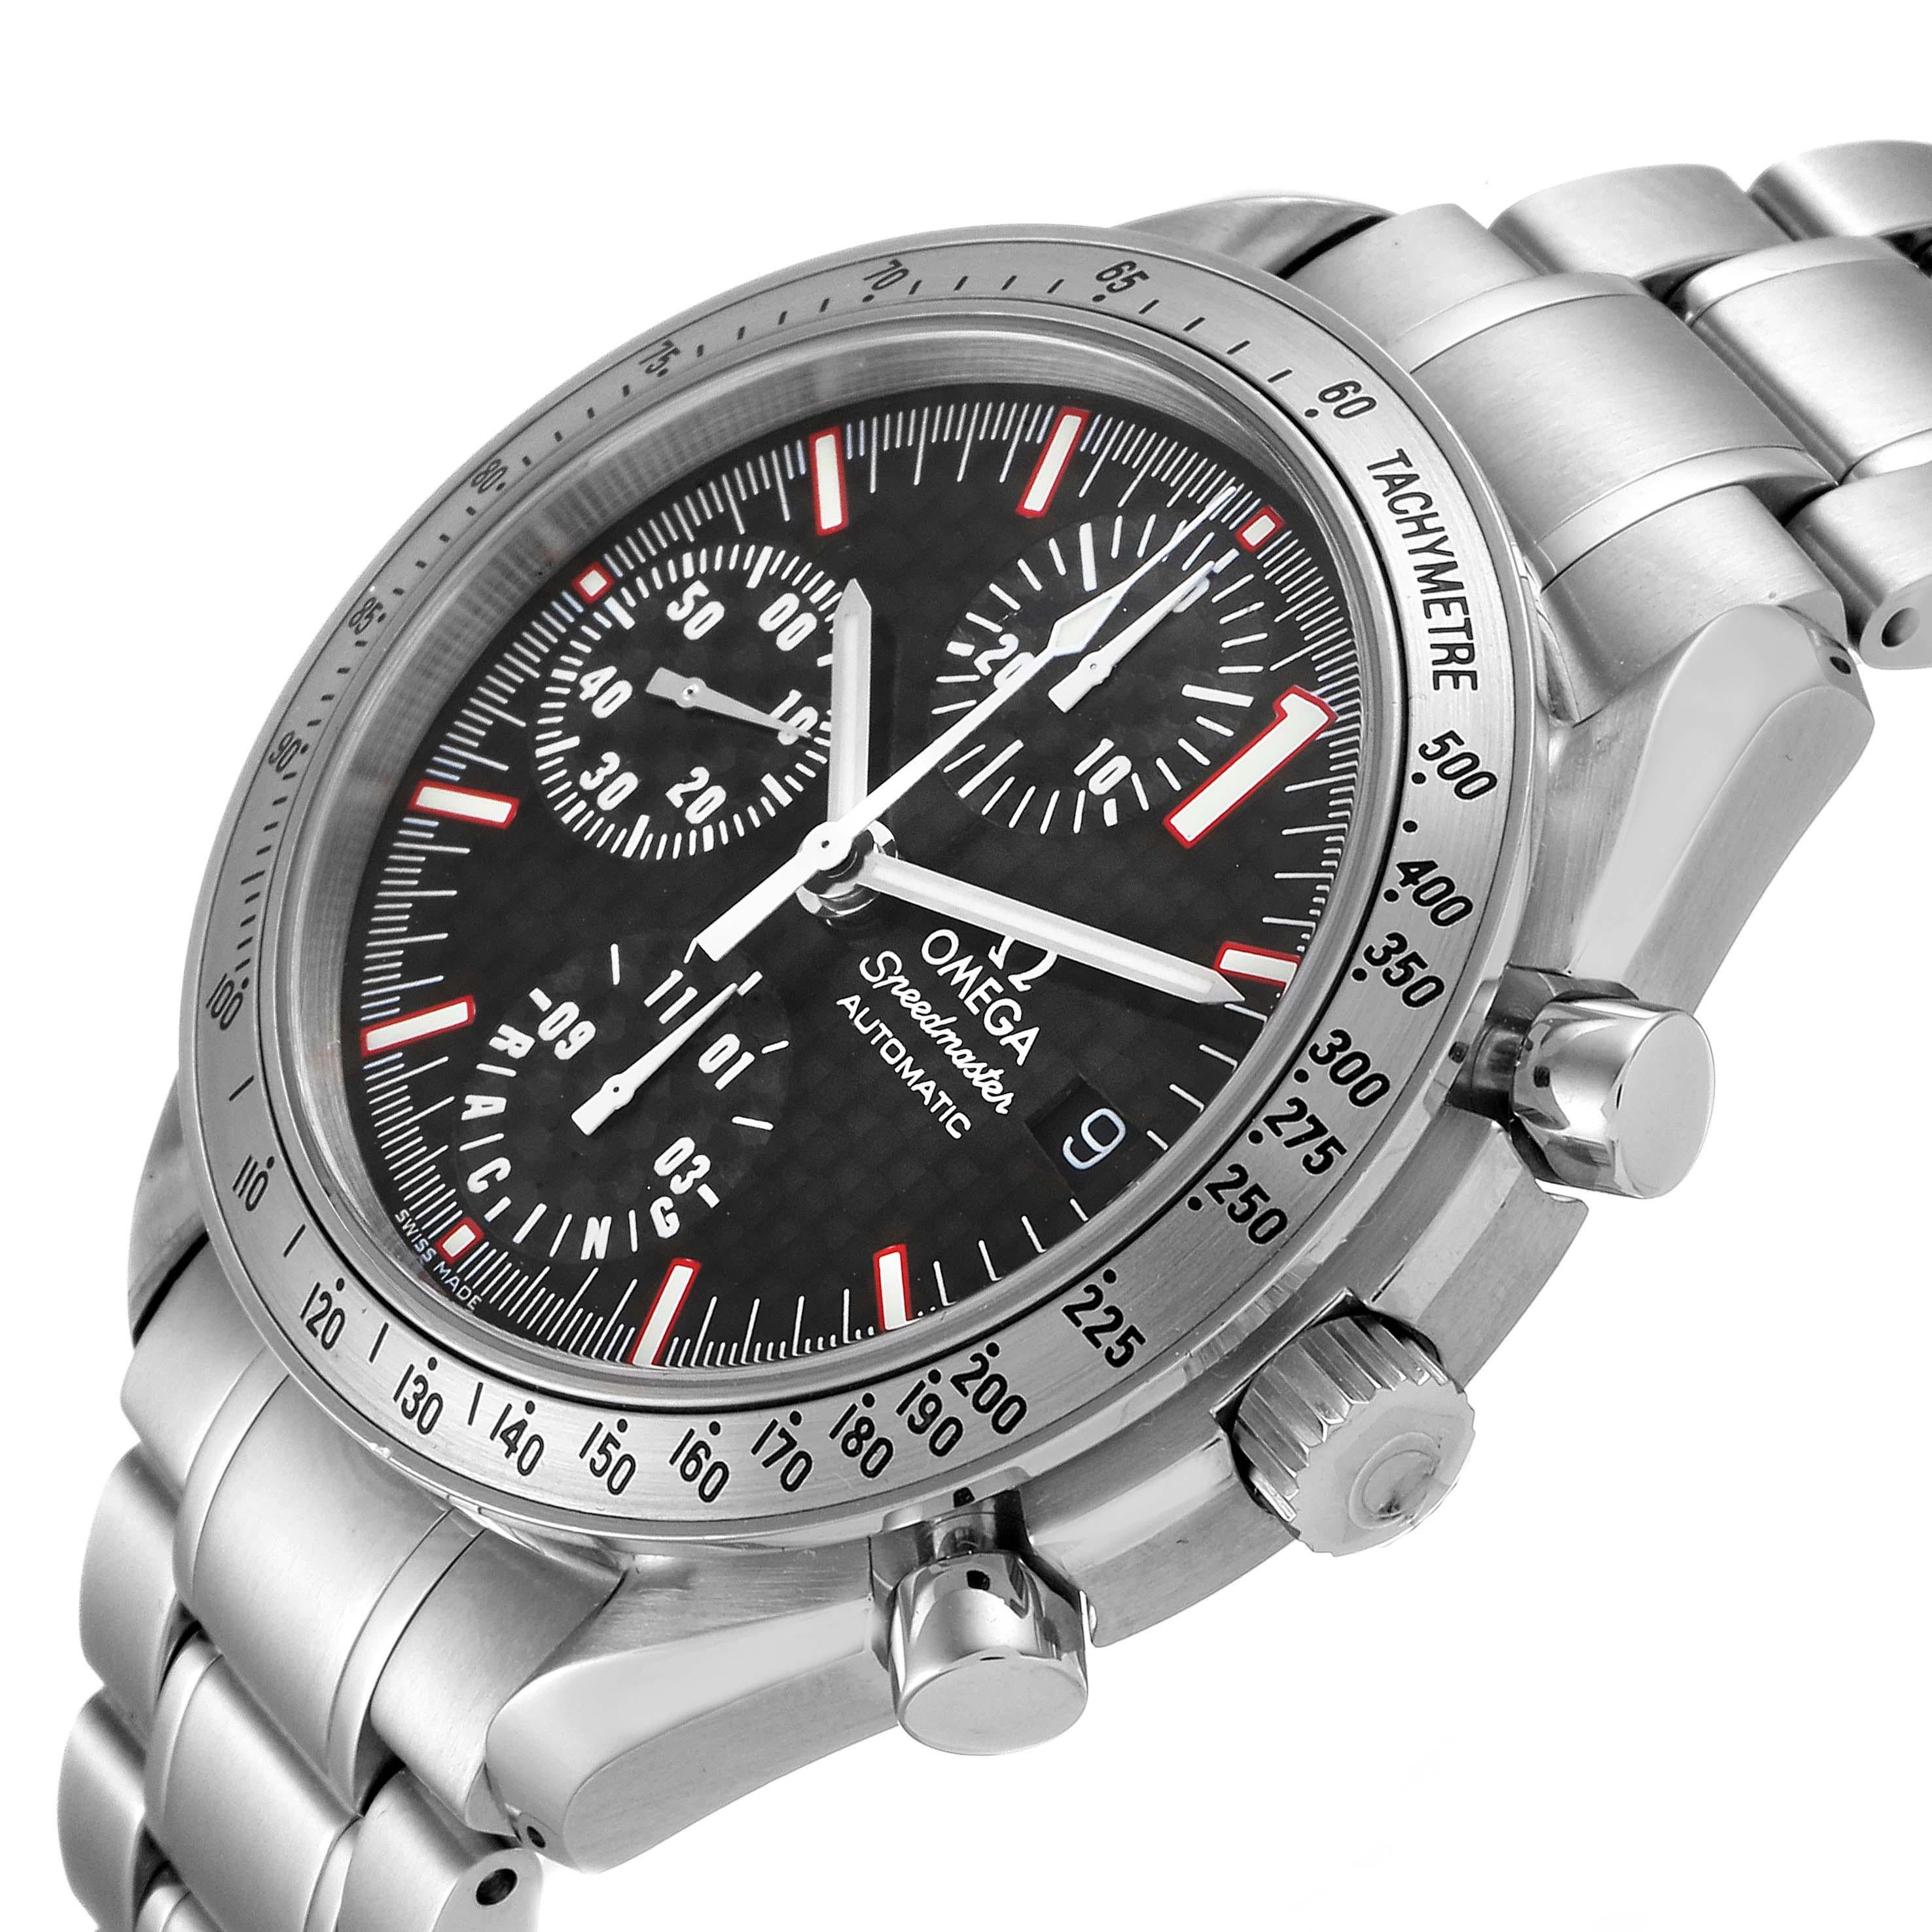 Omega Speedmaster Schumacher Racing Limited Edition Watch 3519.50.00 In Excellent Condition For Sale In Atlanta, GA